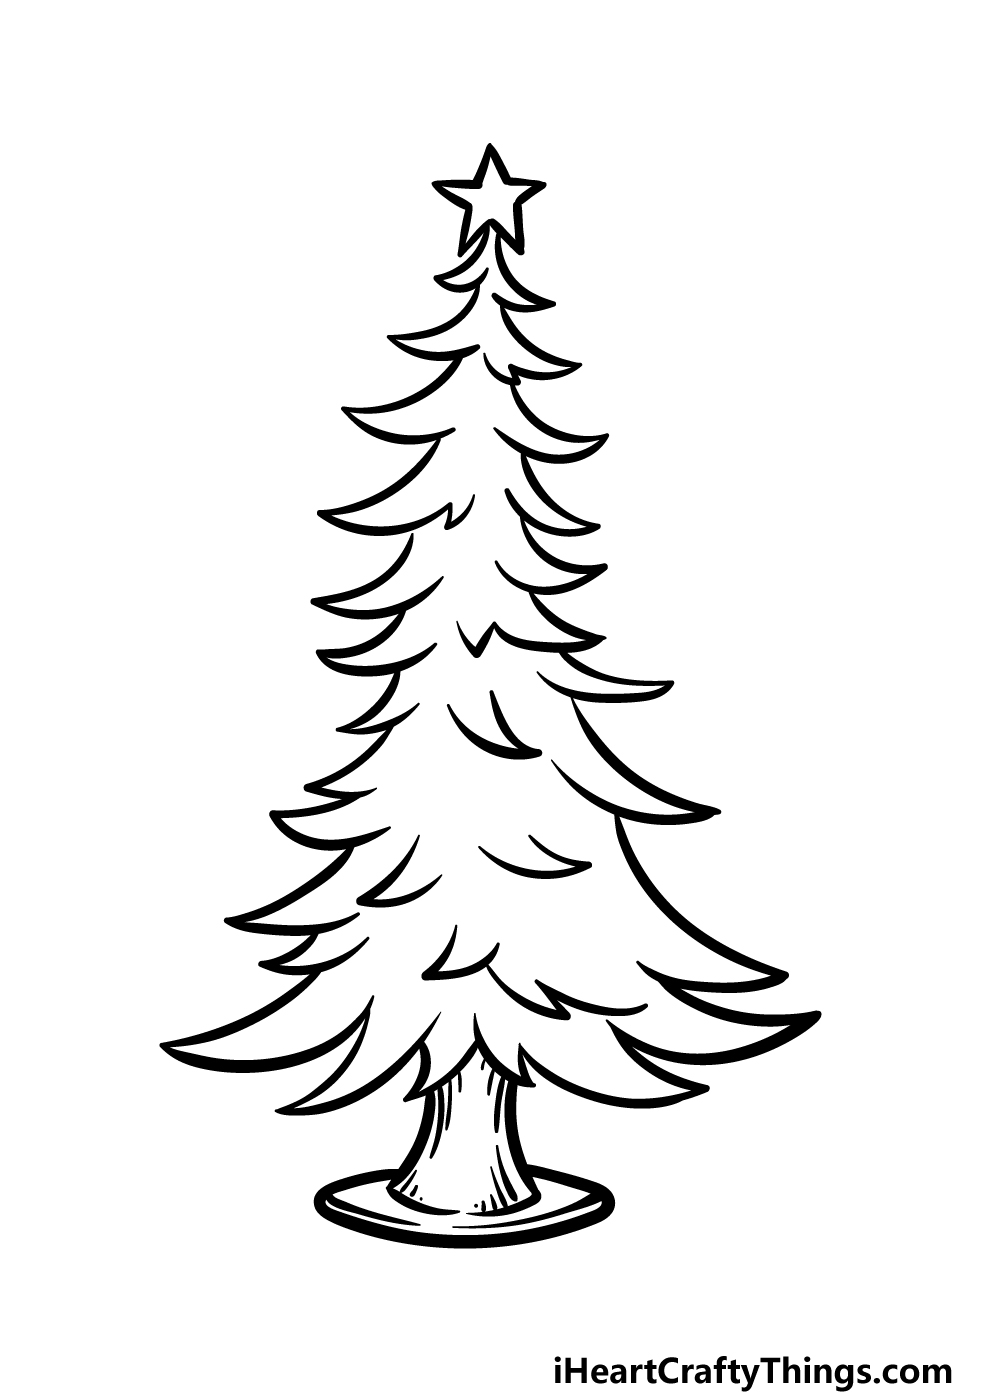 Cartoon Christmas Tree Drawing - How To Draw A Cartoon Christmas Tree Step  By Step